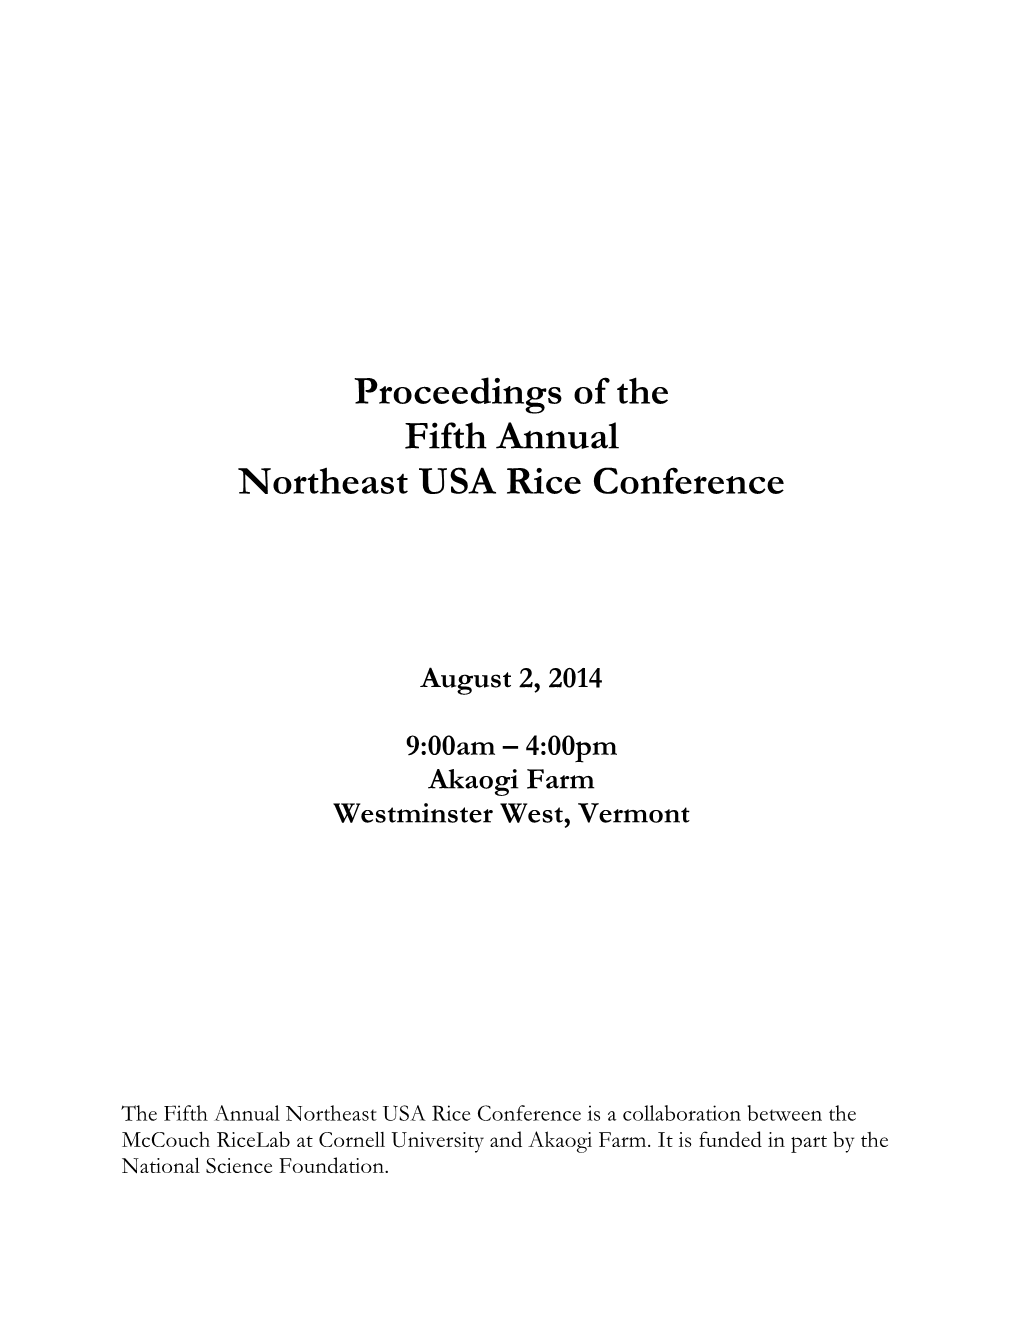 Proceedings of the Fifth Annual Northeast USA Rice Conference